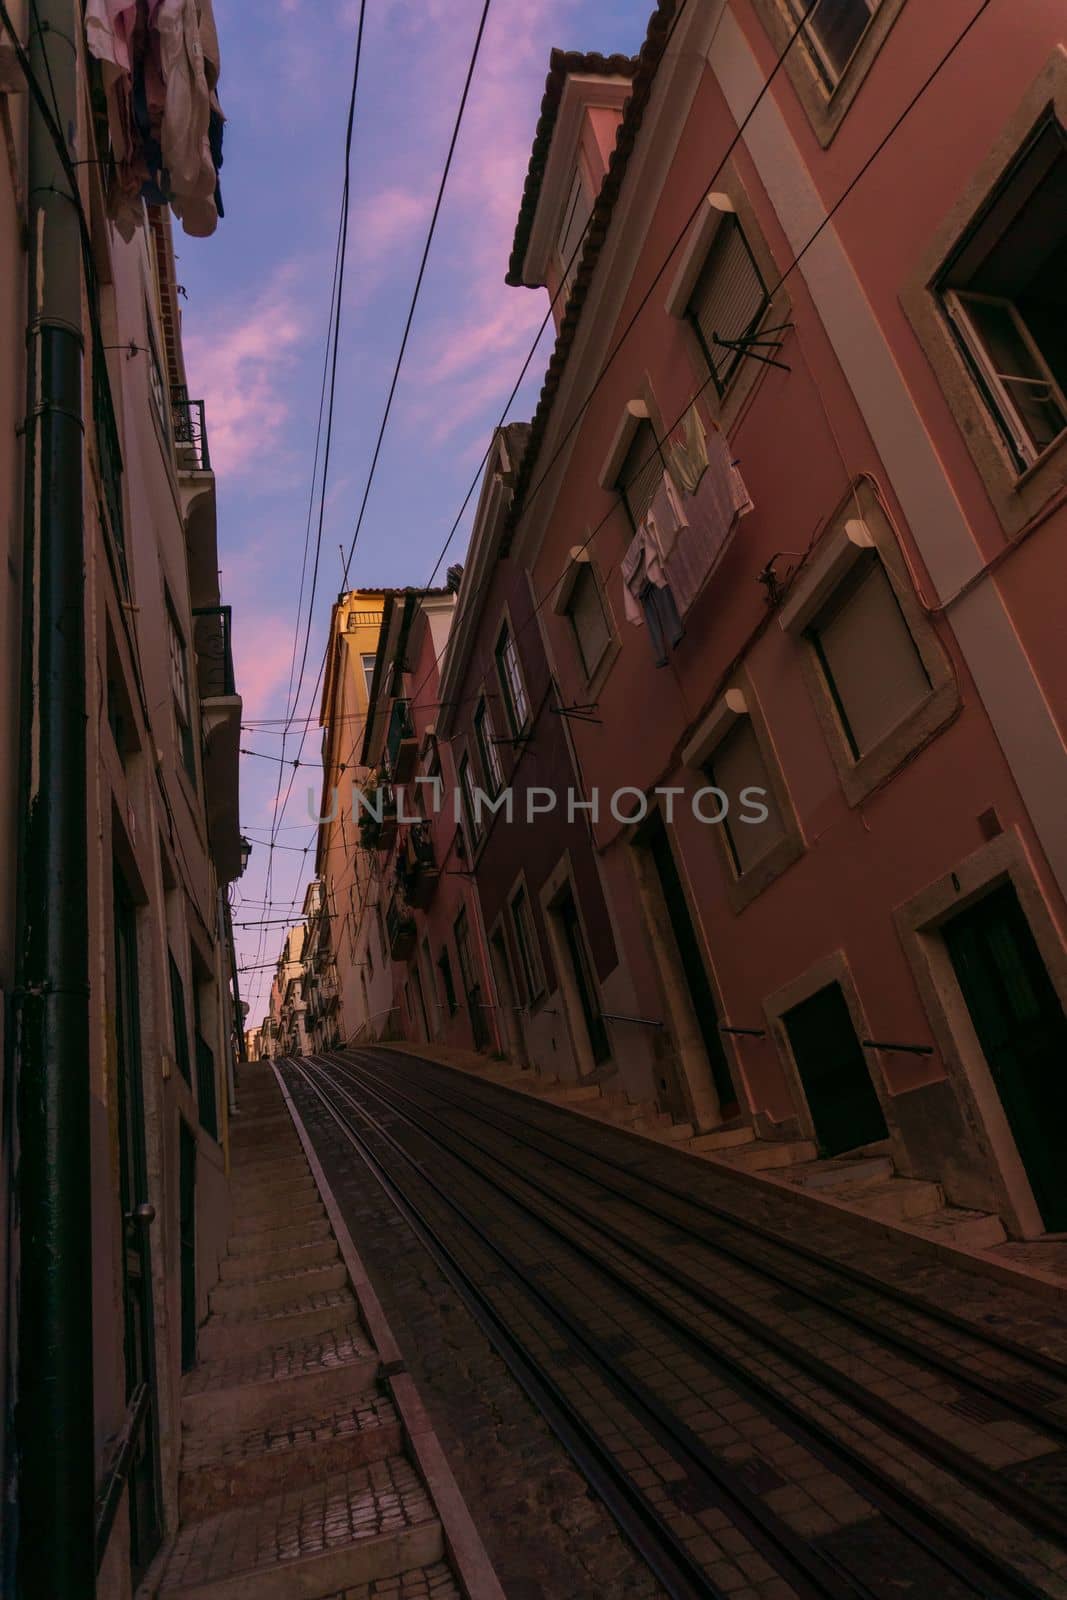 Narrow street with rails in Lisbon at sunset